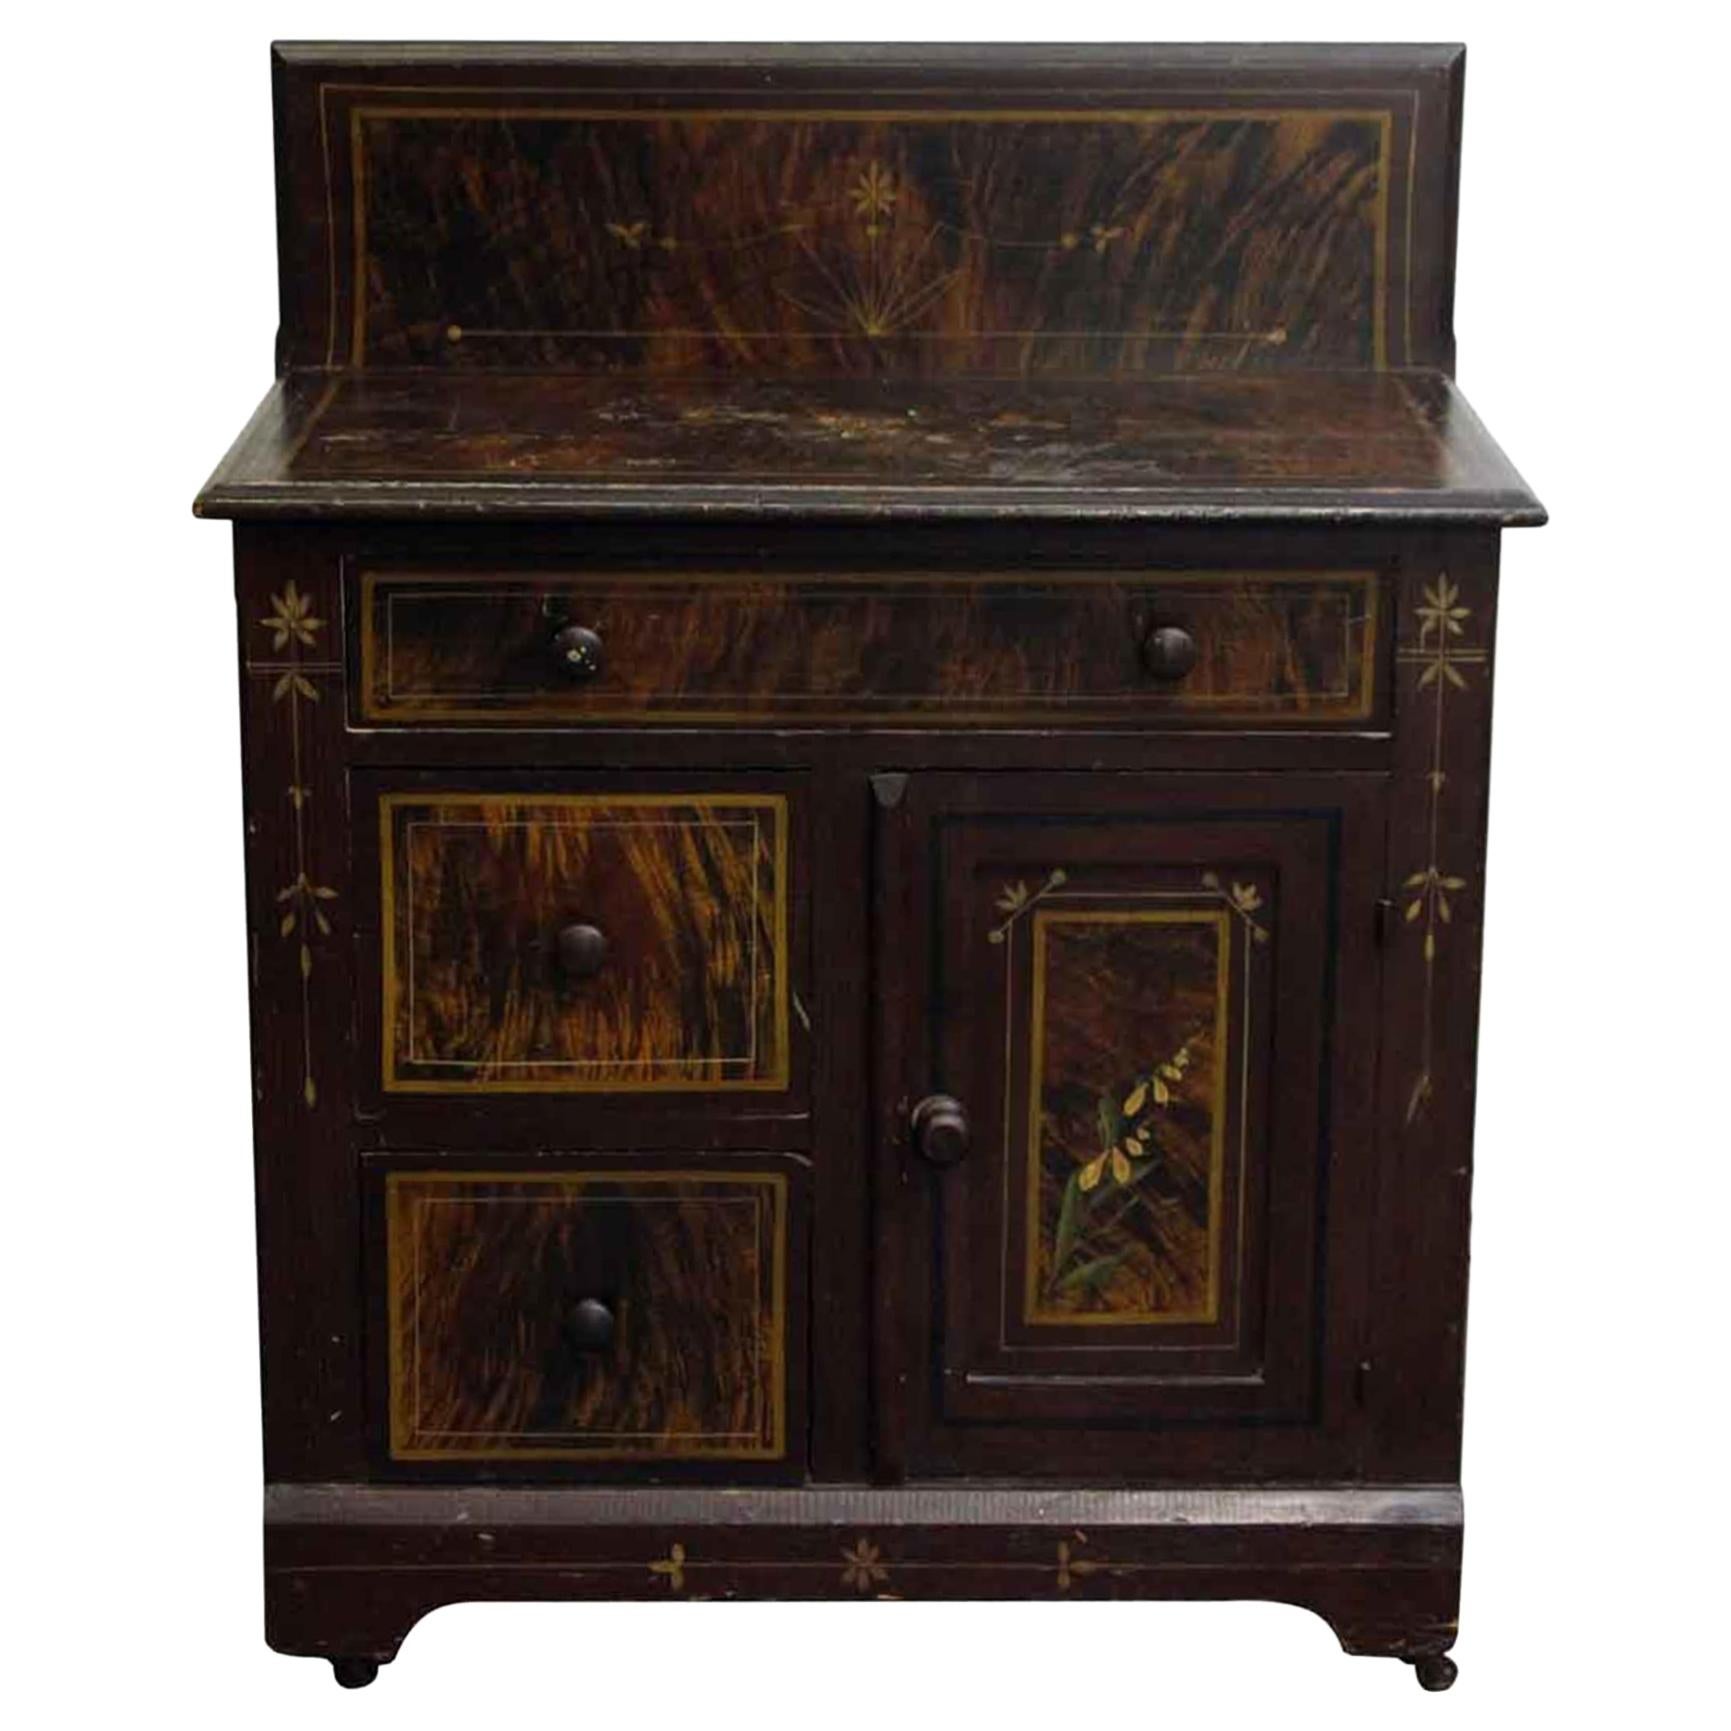 1880s Wooden Dark Tone Wash Stand with a Hand Painted Decorative Finish